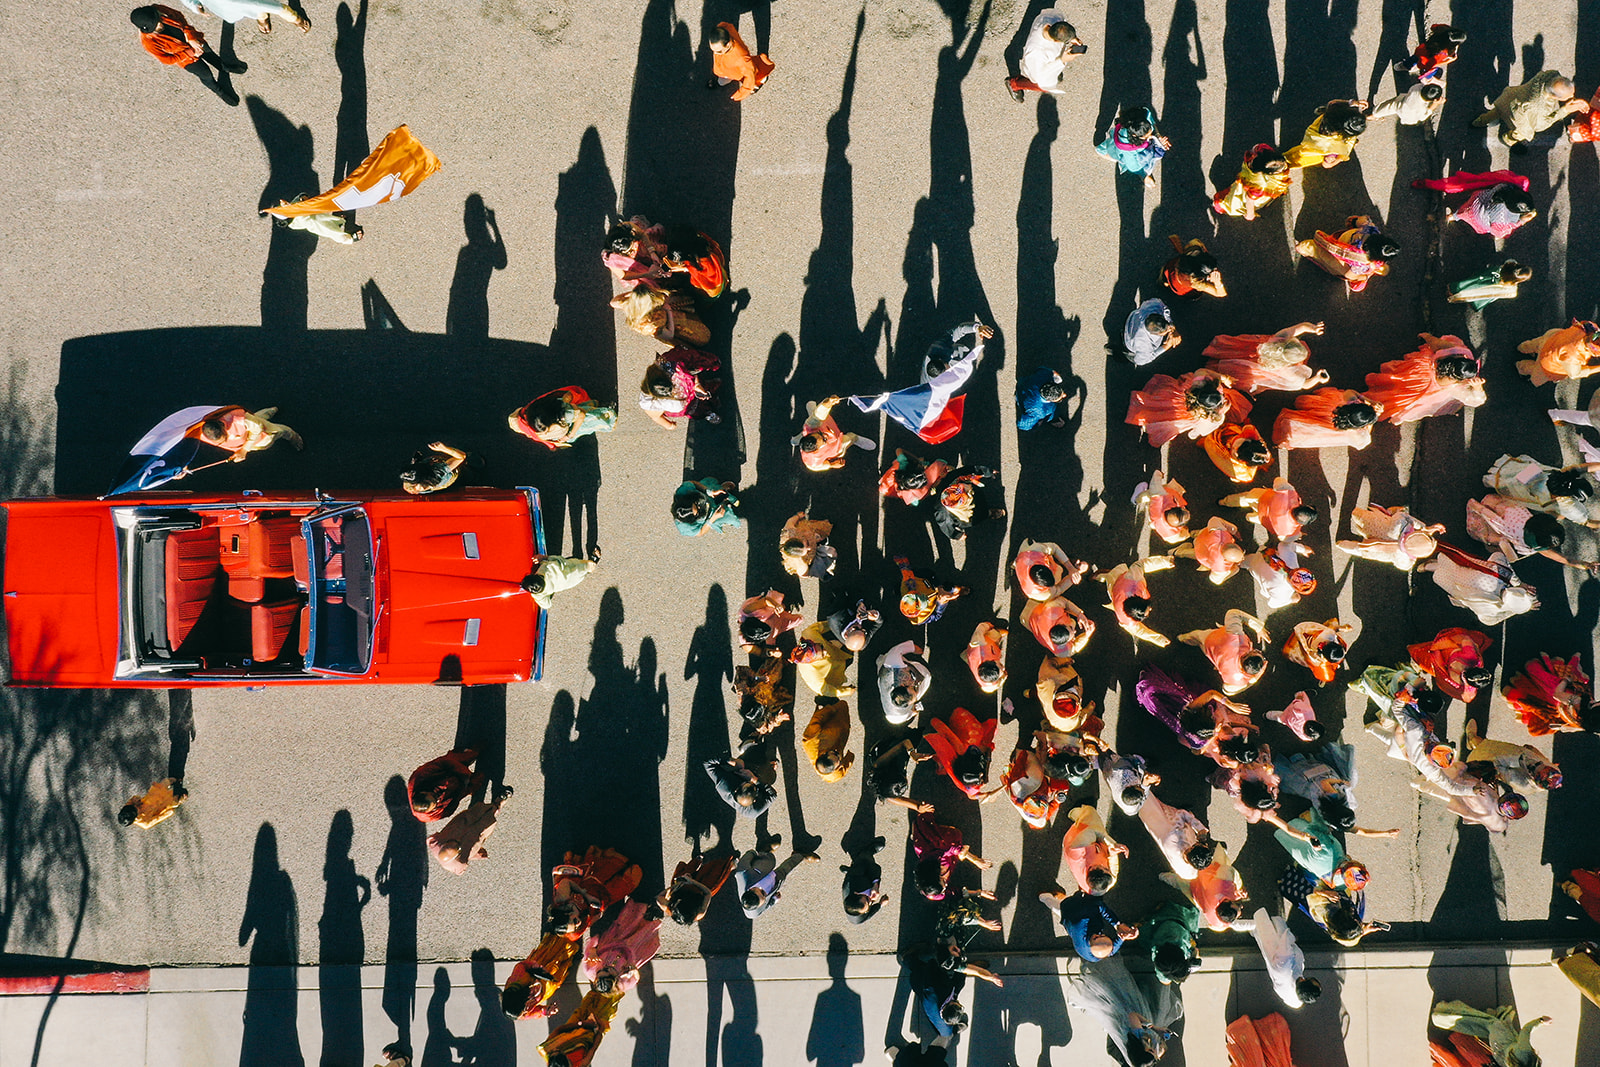 Aerial view of group of people in colorful clothing walking behind a red convertible